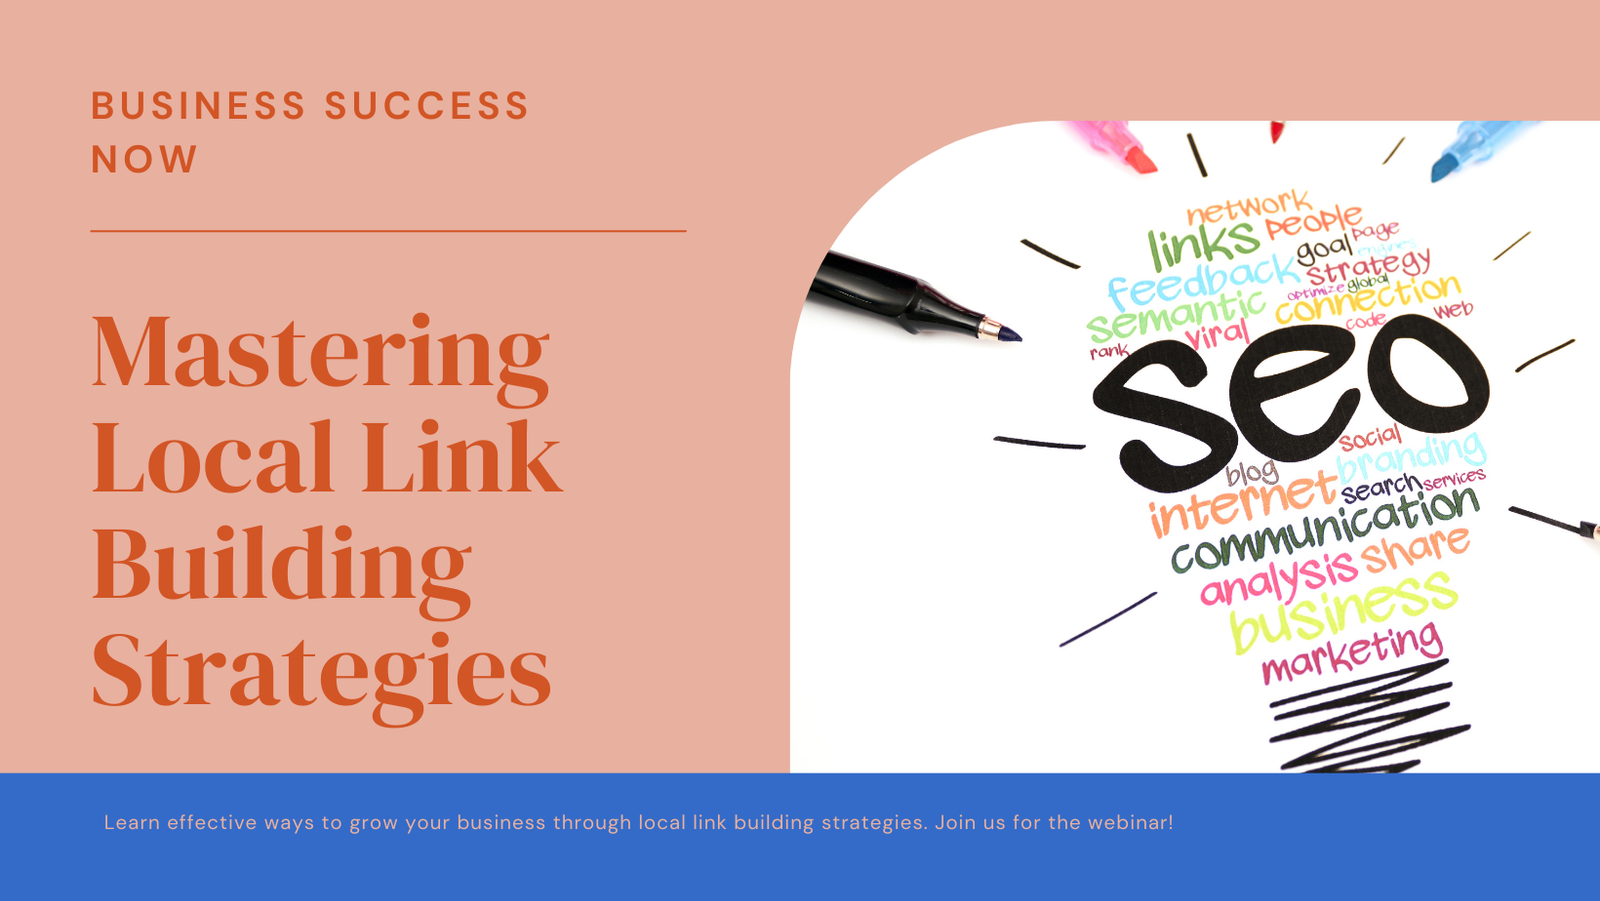 Effective Local Link Building Strategies for Business Success